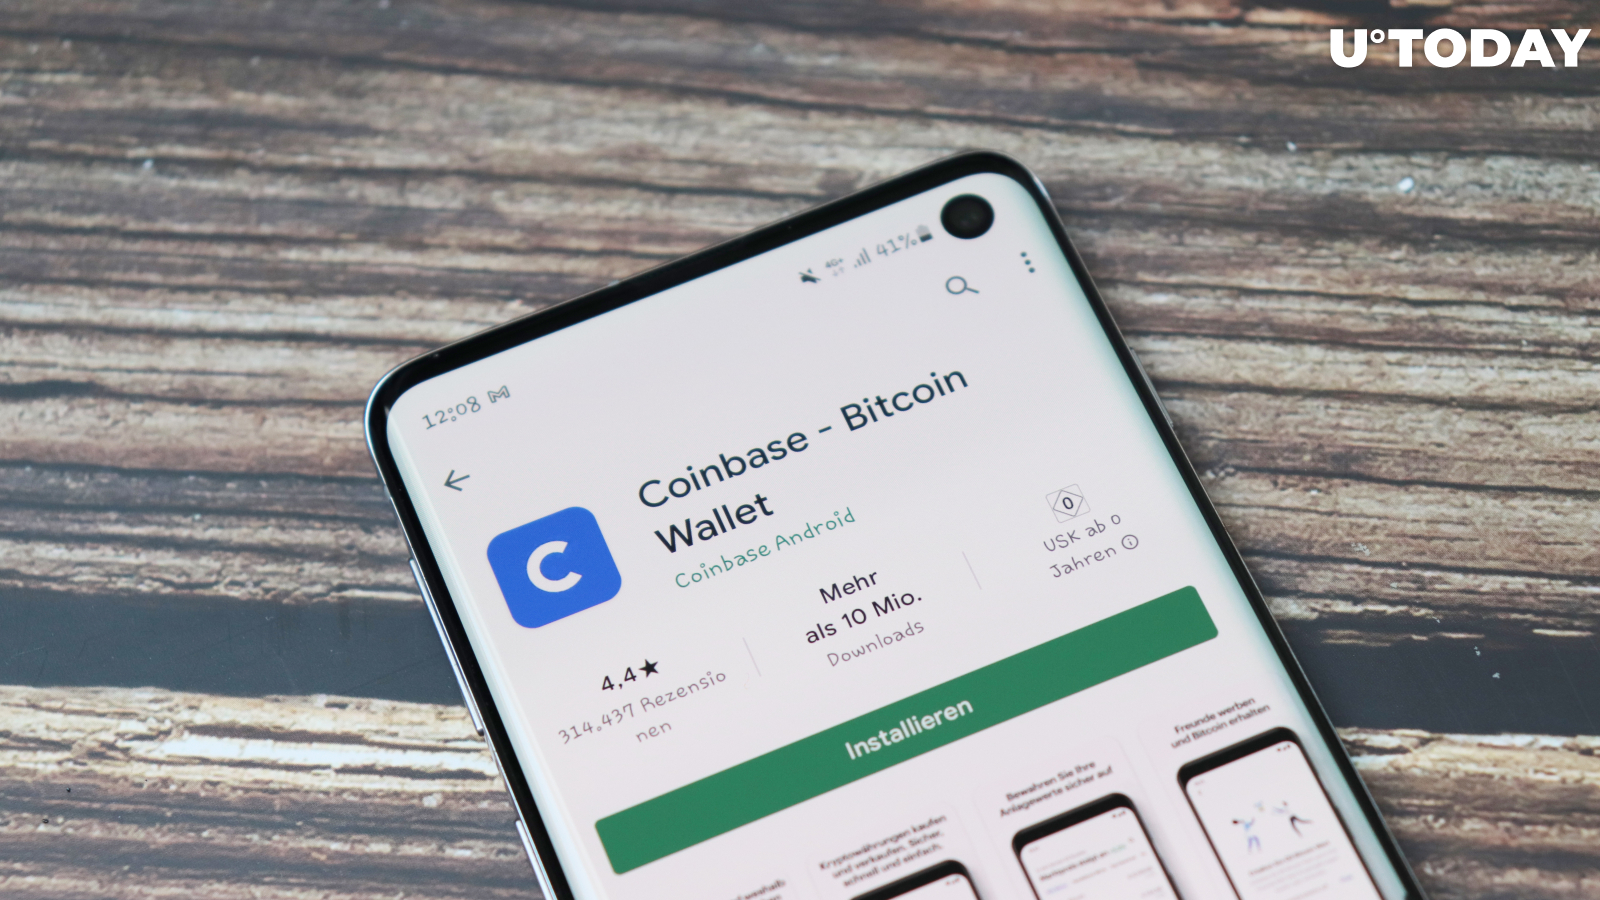 Coinbase Wallet Debuts Browser Extension for Connecting to Uniswap, SushiSwap and Other DeFi Applications 